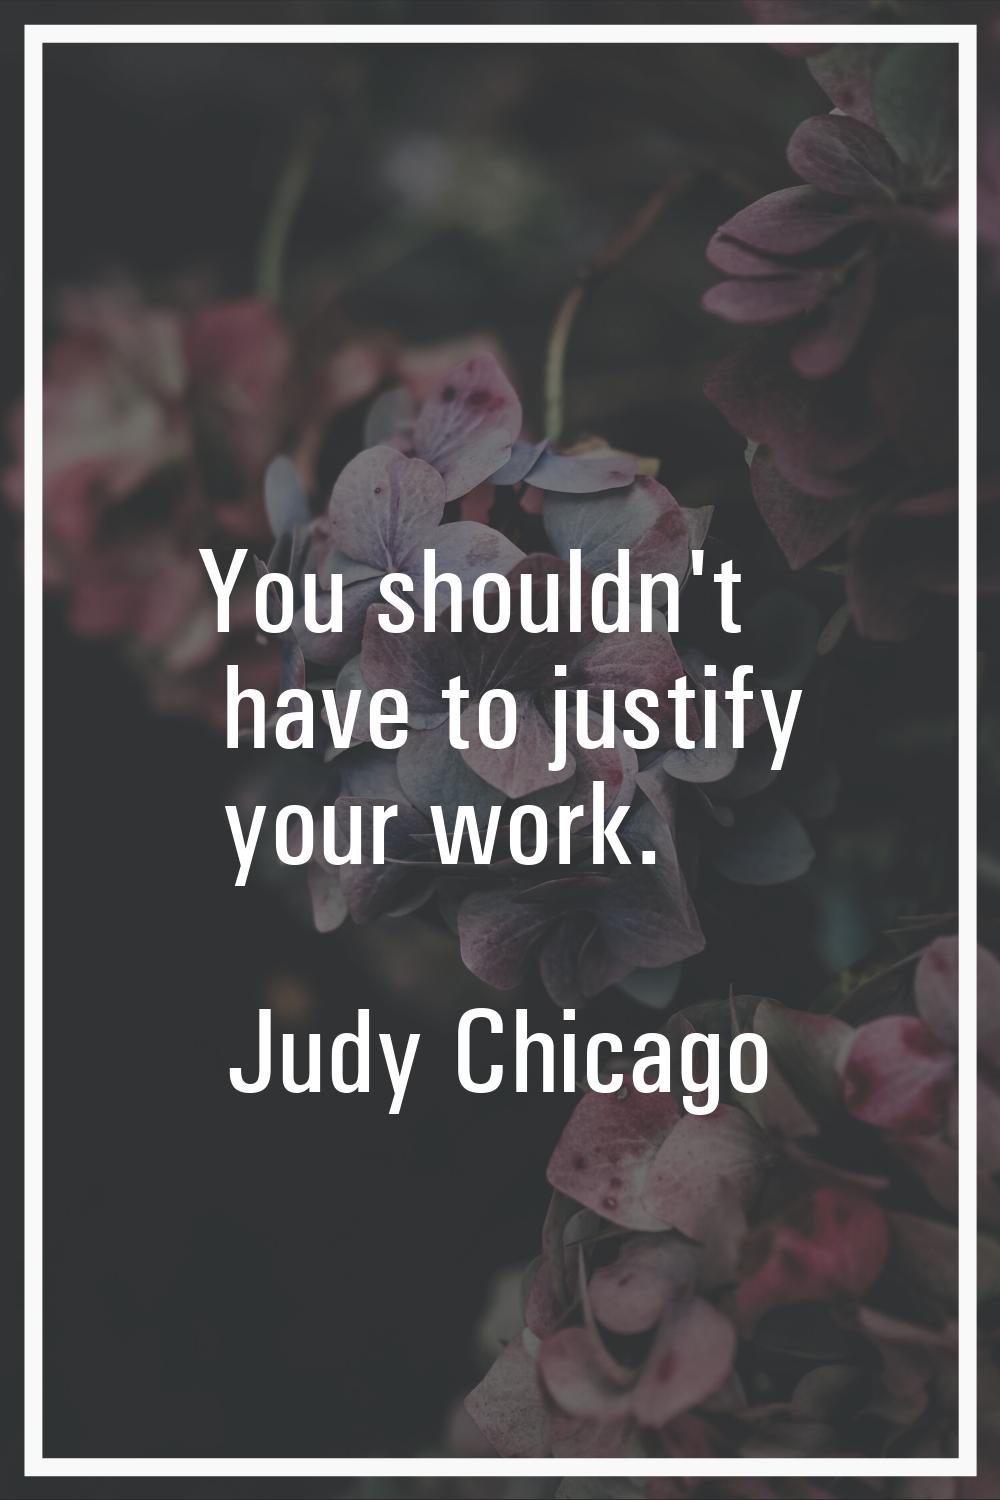 You shouldn't have to justify your work.